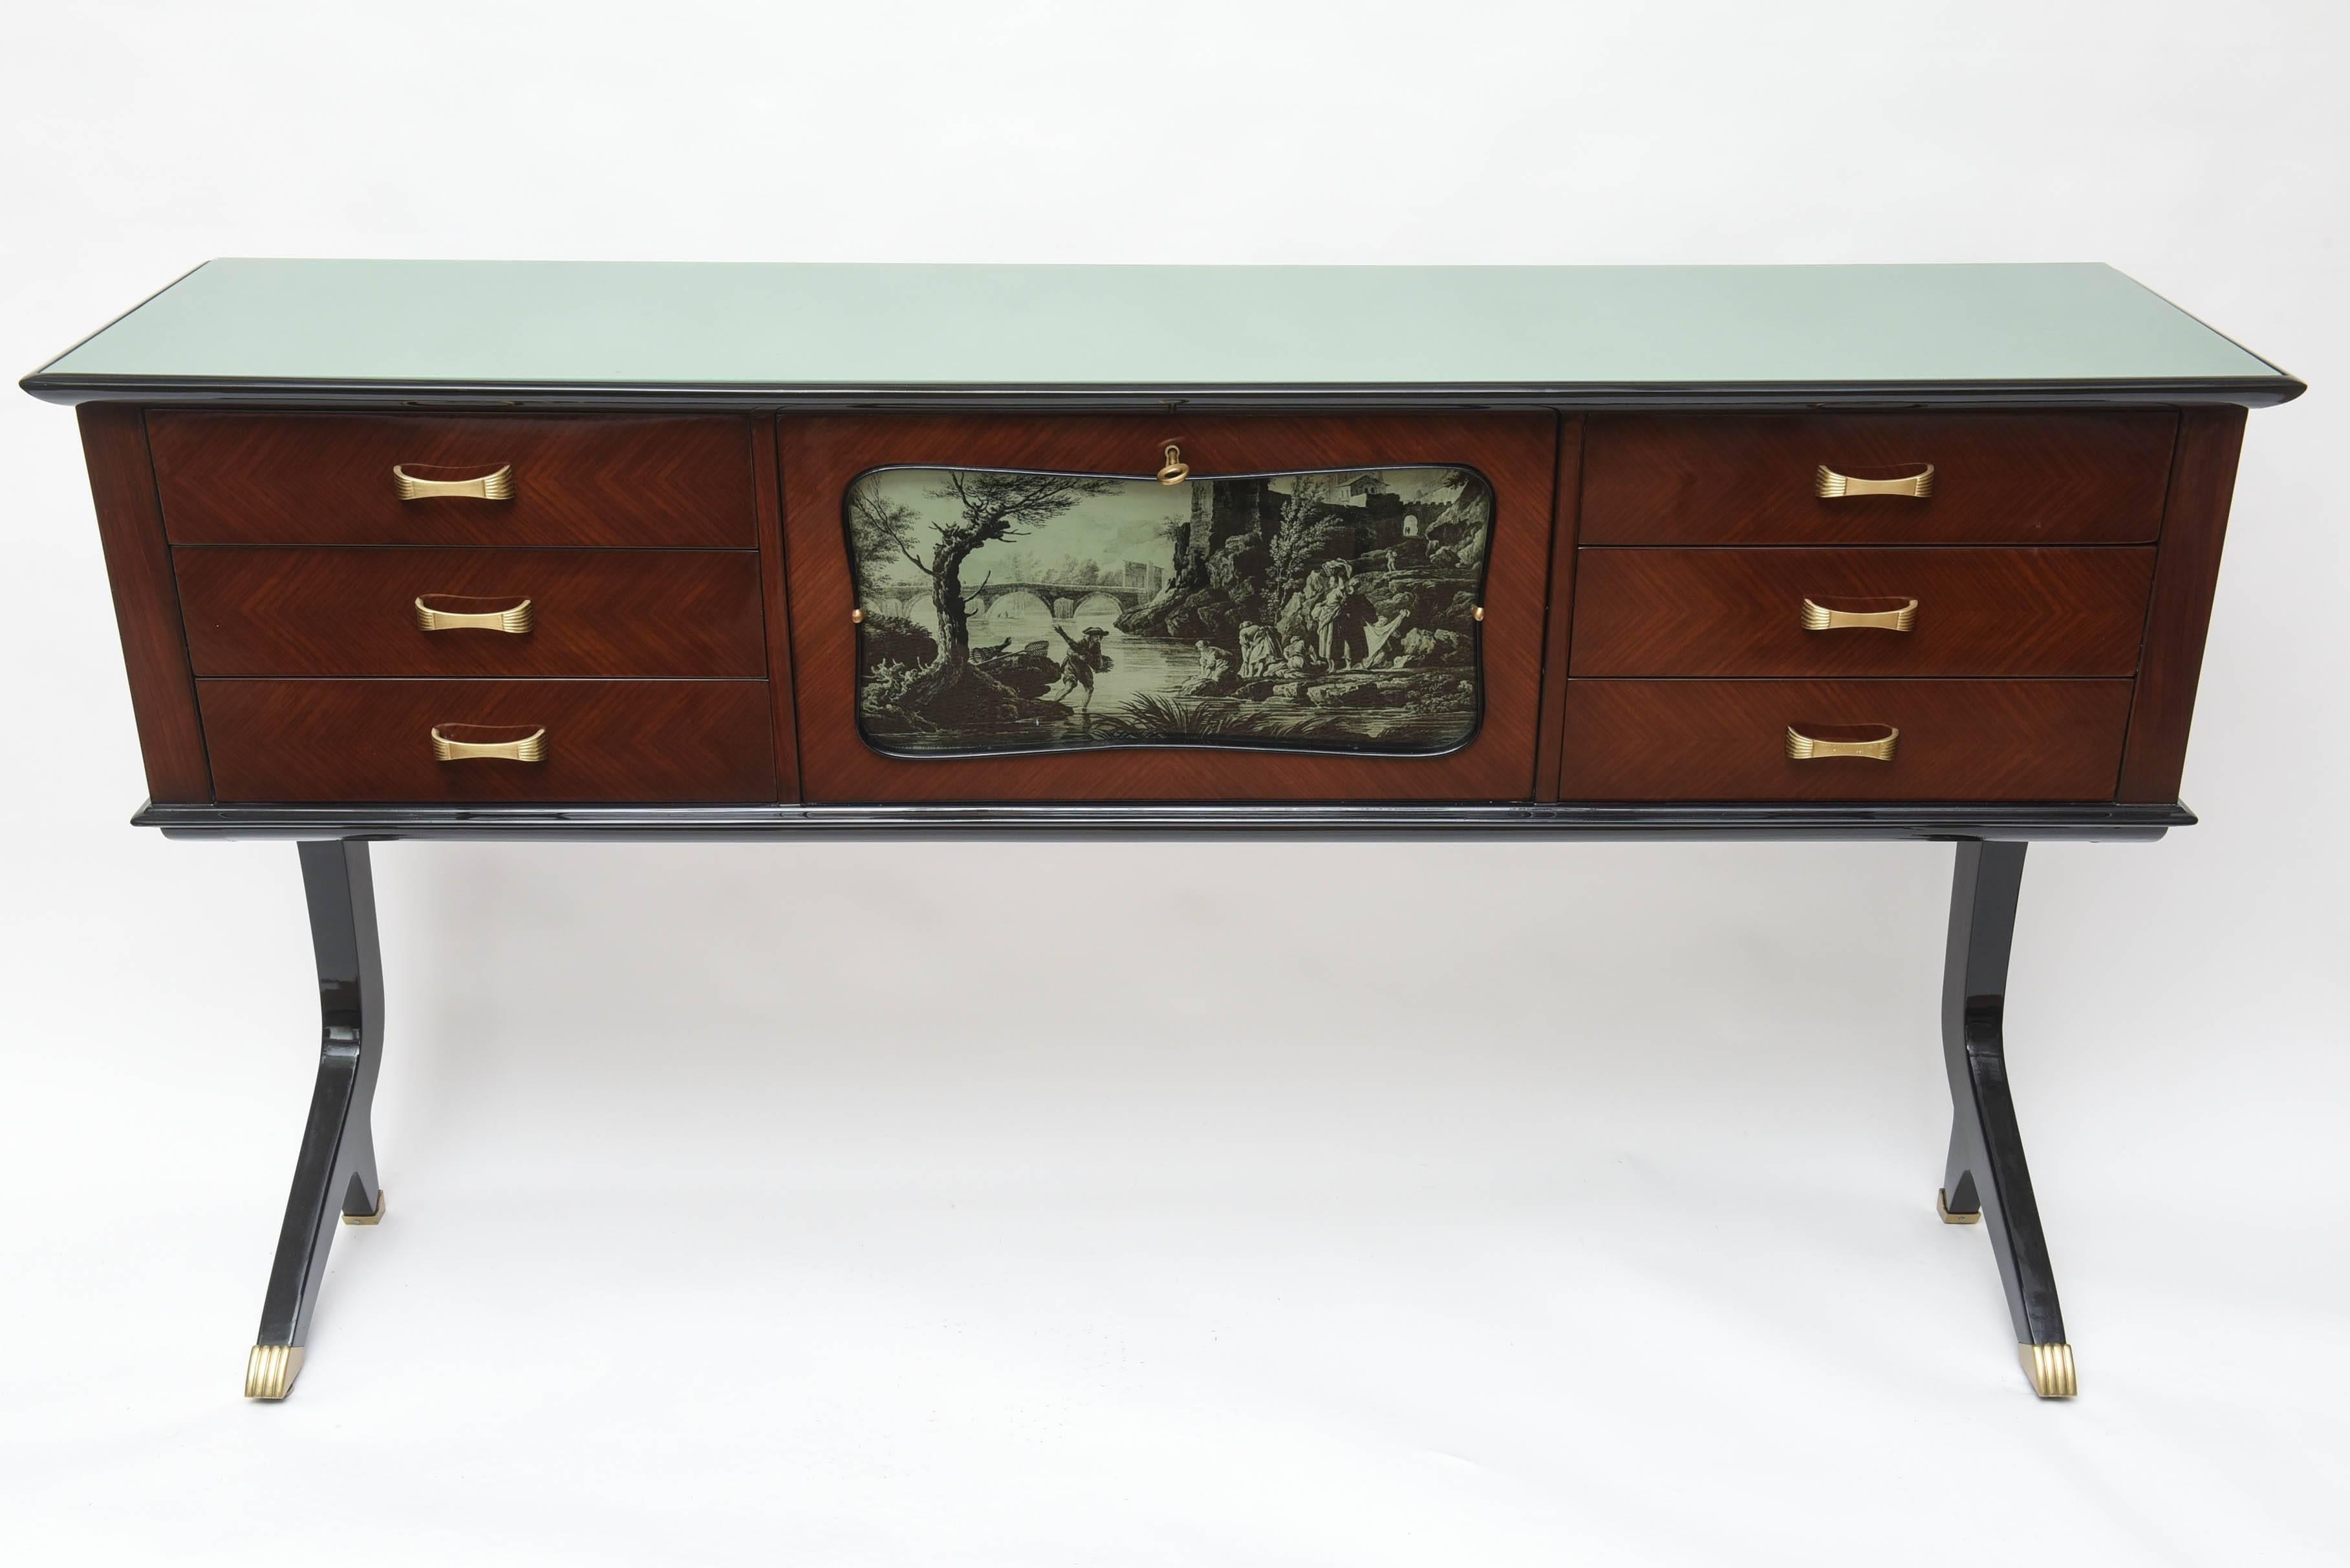 Rare and elegant Neapolitan dry bar or sideboard. Center bar with mirrored interior all original with foxing. Interior lamp. Depicting an églomisé etching of a laundry party at the riverside with a fisherman. Flanked by six drawers with brass